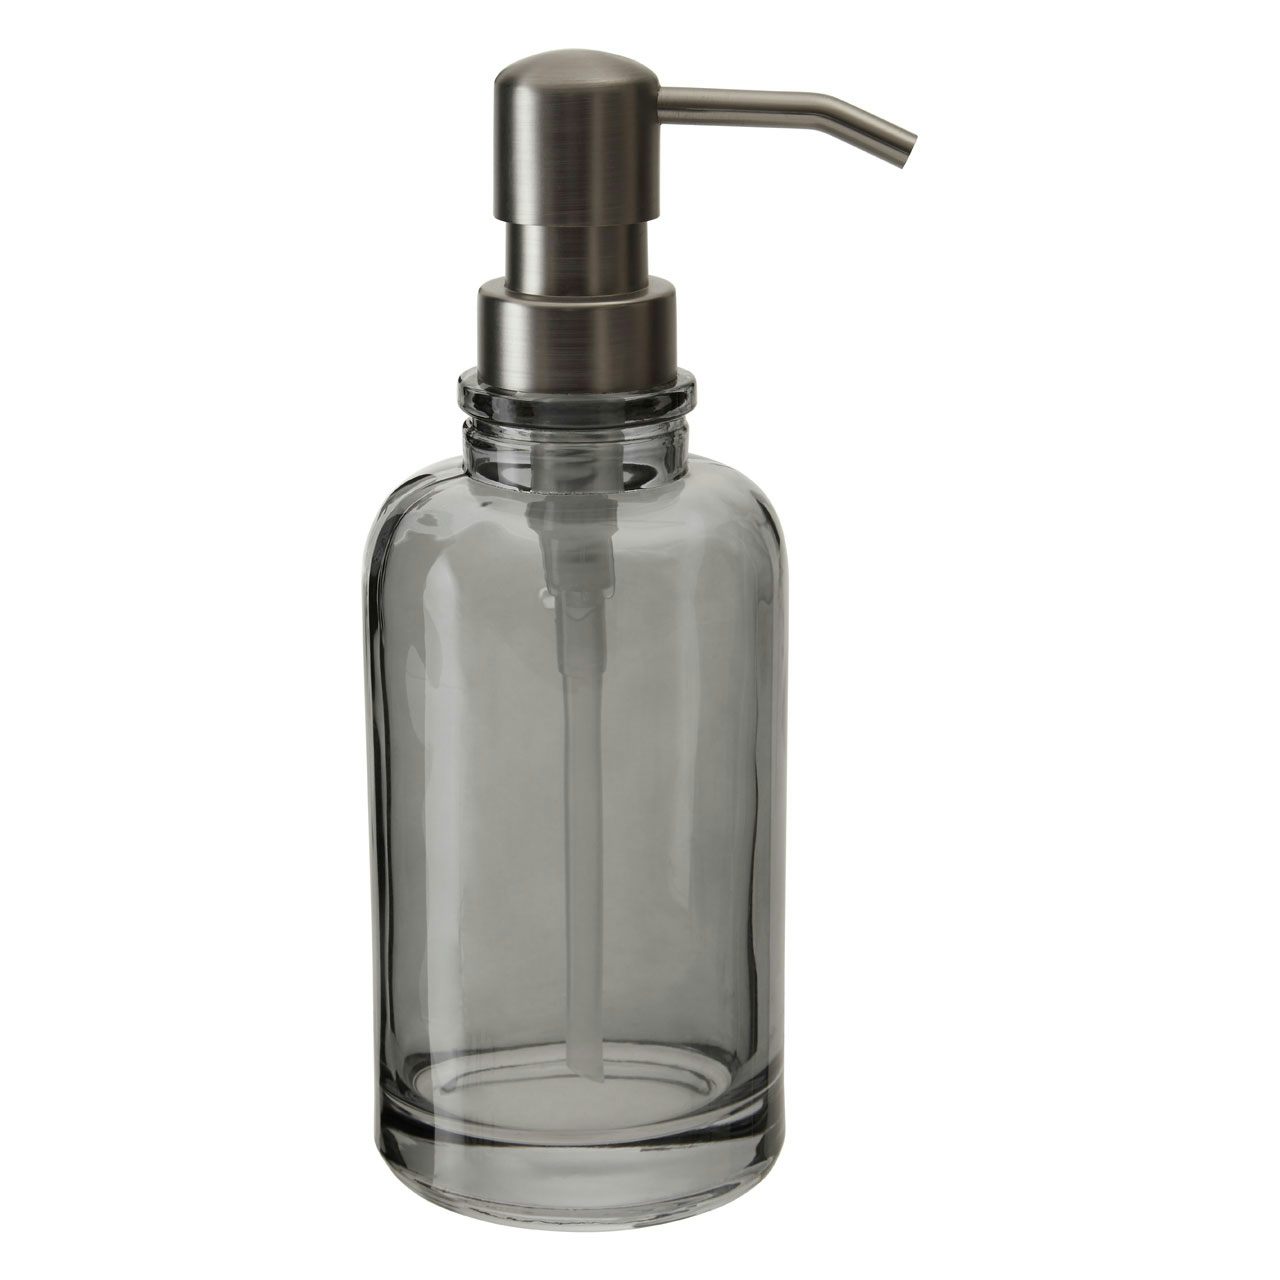 Accents Ridley grey glass large soap dispenser